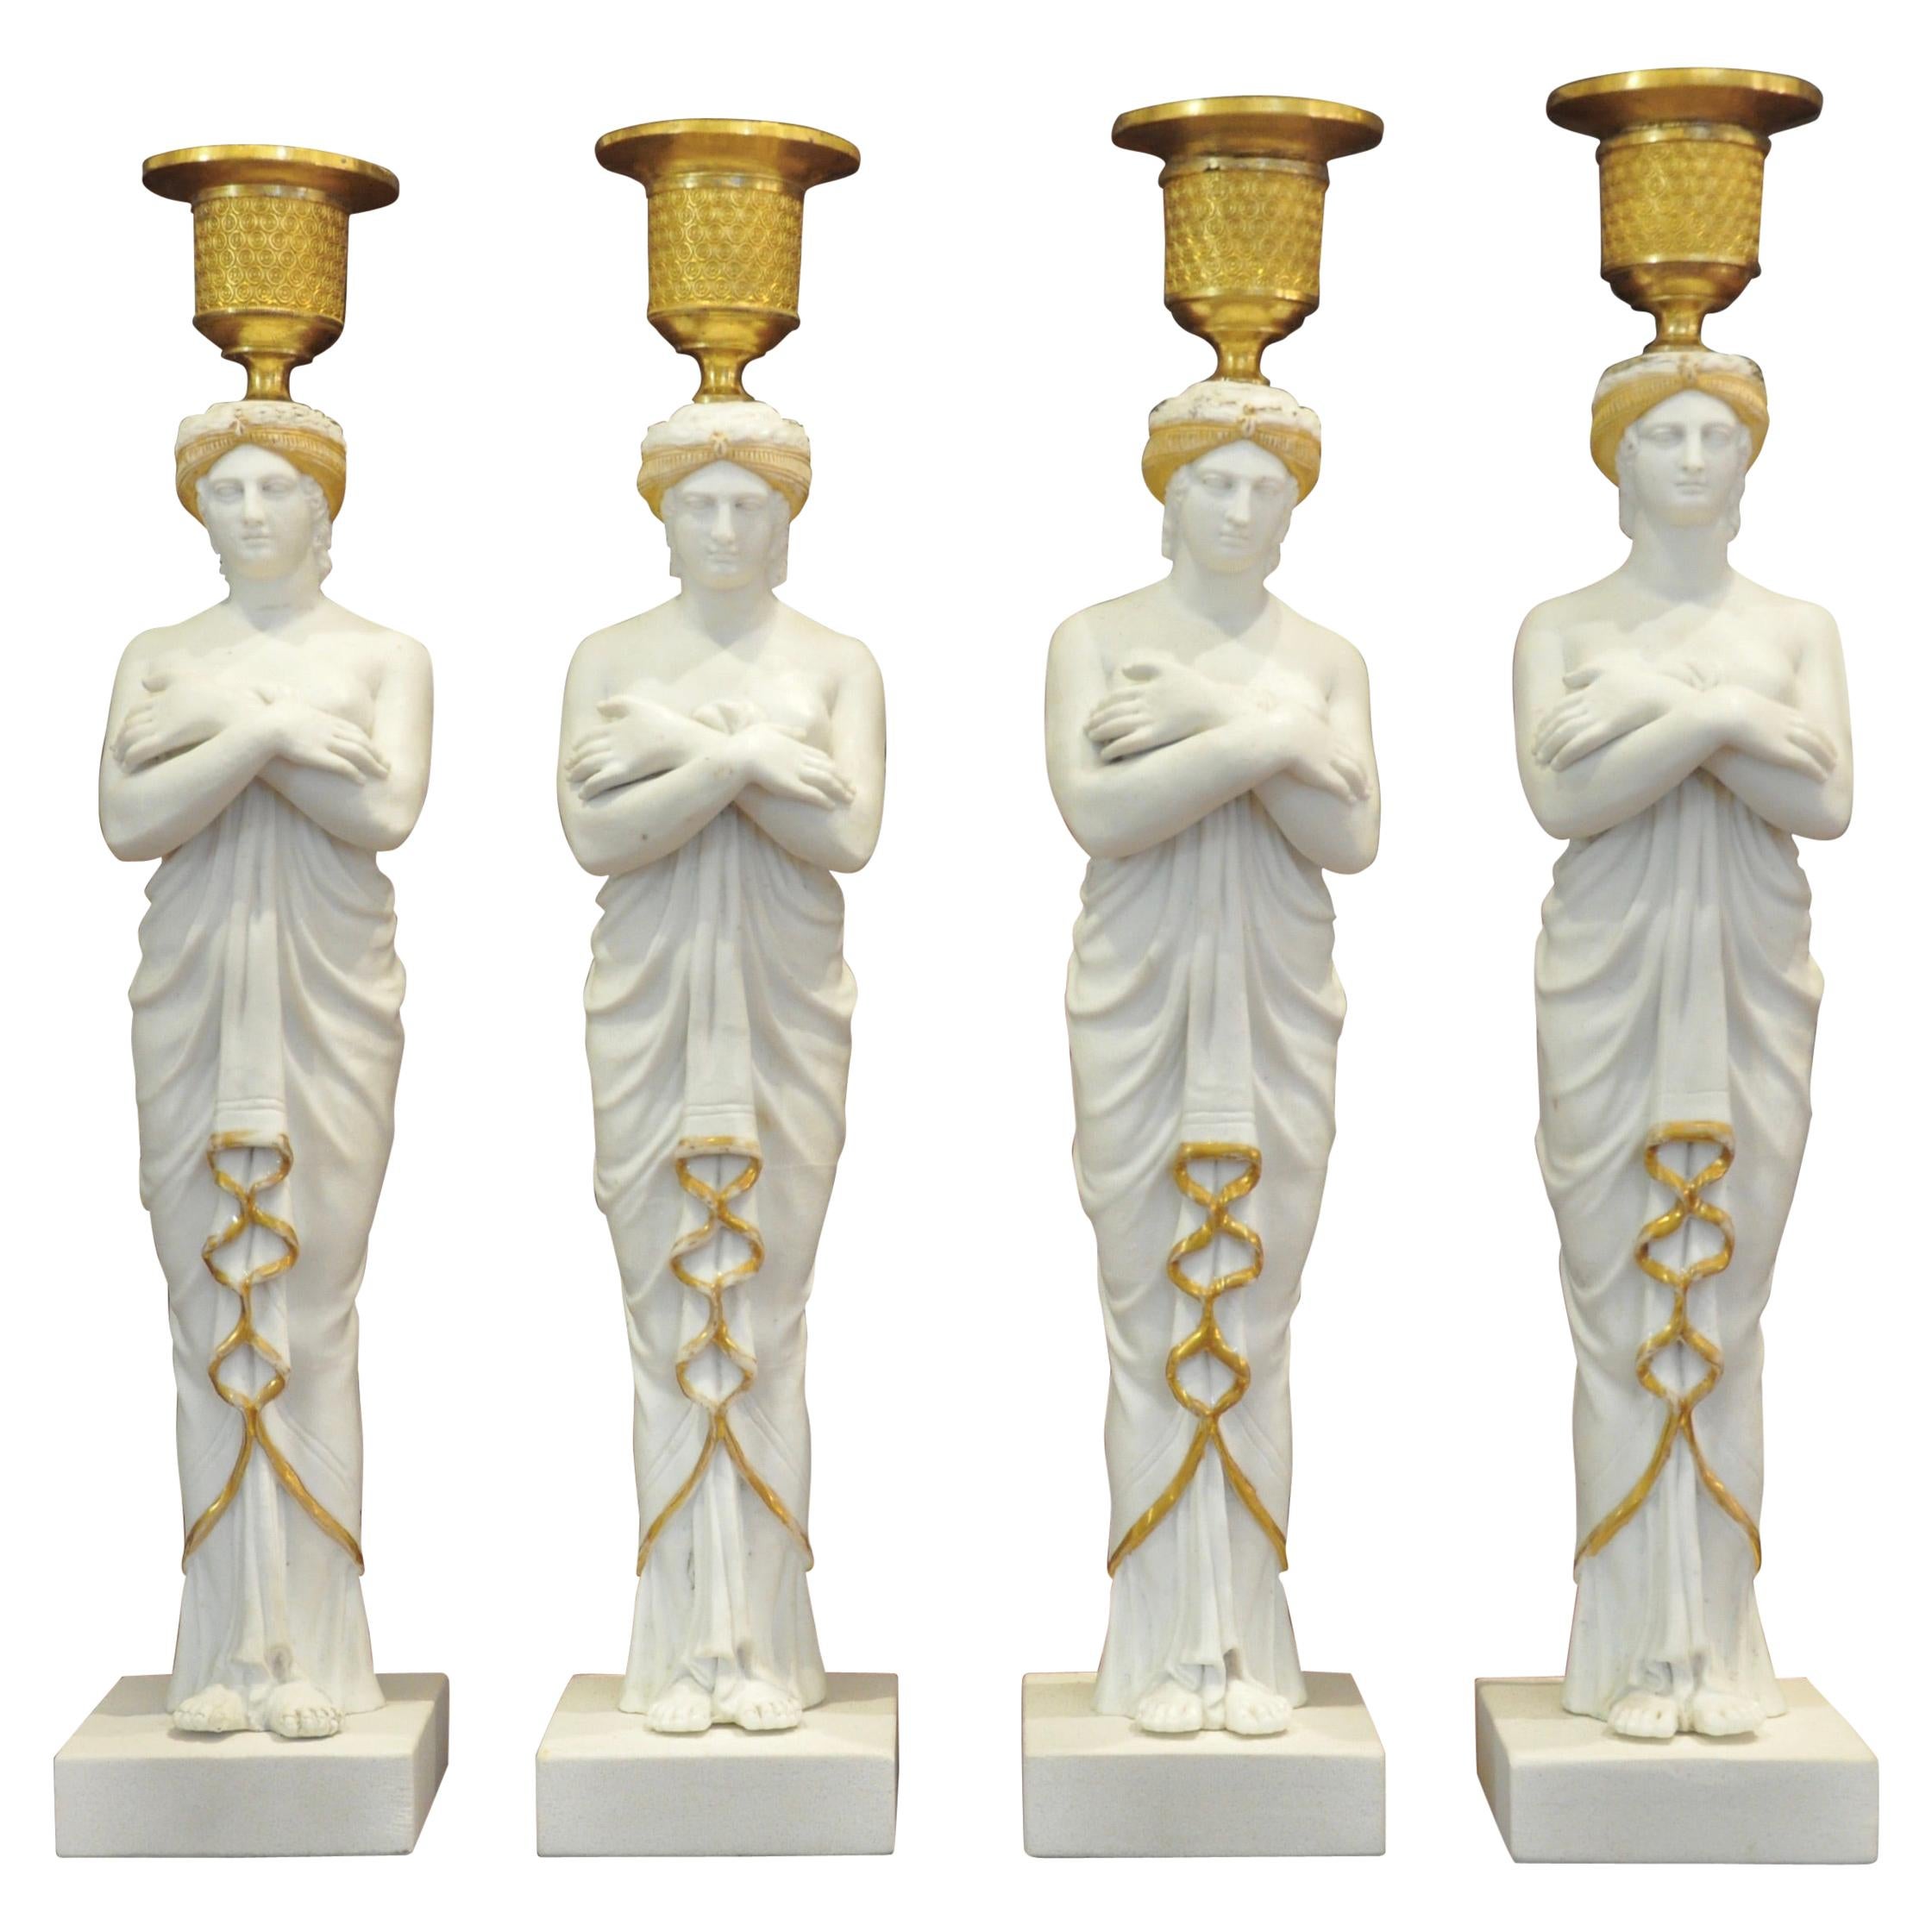 Set of Four Early 19th Century Biscuit Caryatid Figures as Candlesticks